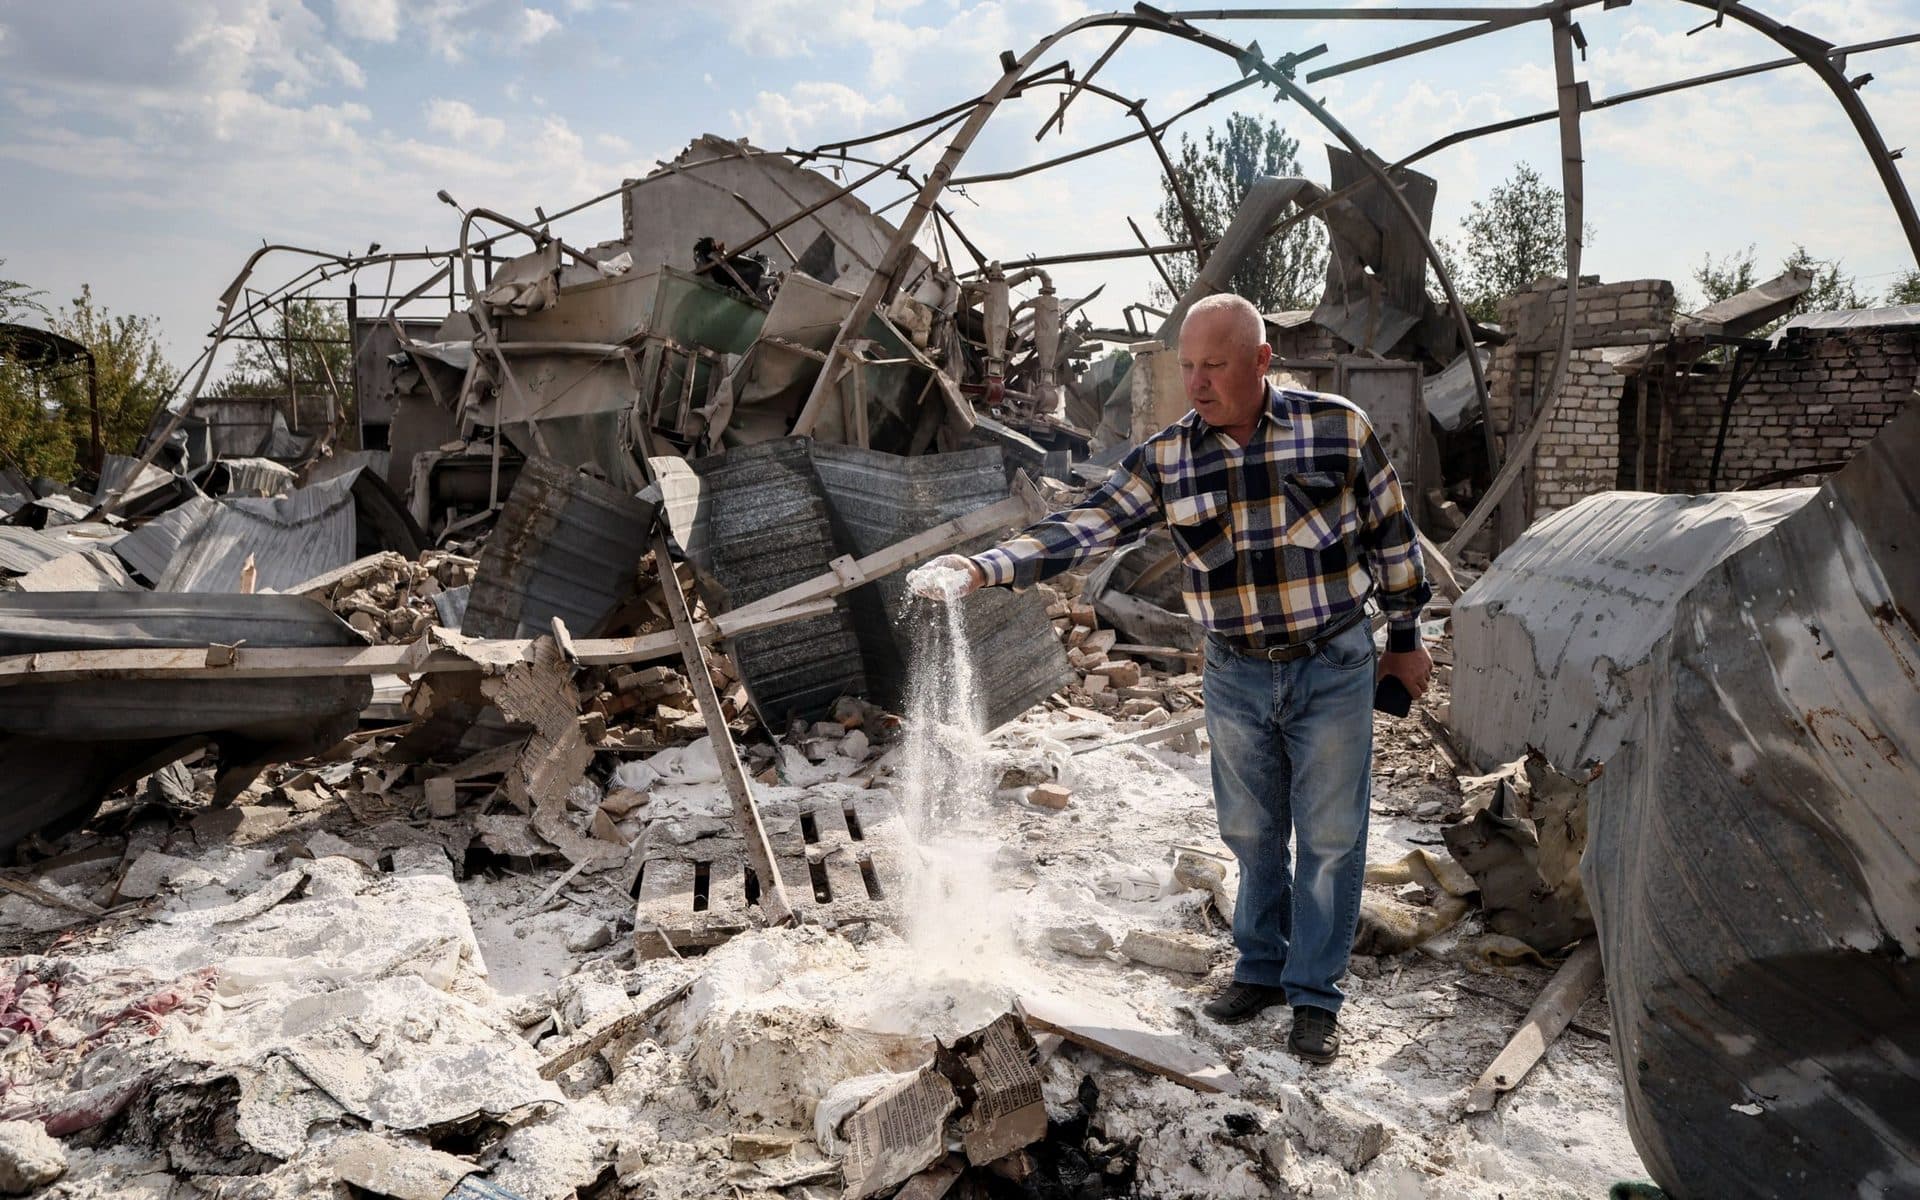 A Ukrainian farmer inspects the rubble of a destroyed mill on his farm, near the frontline town of Orikhiv